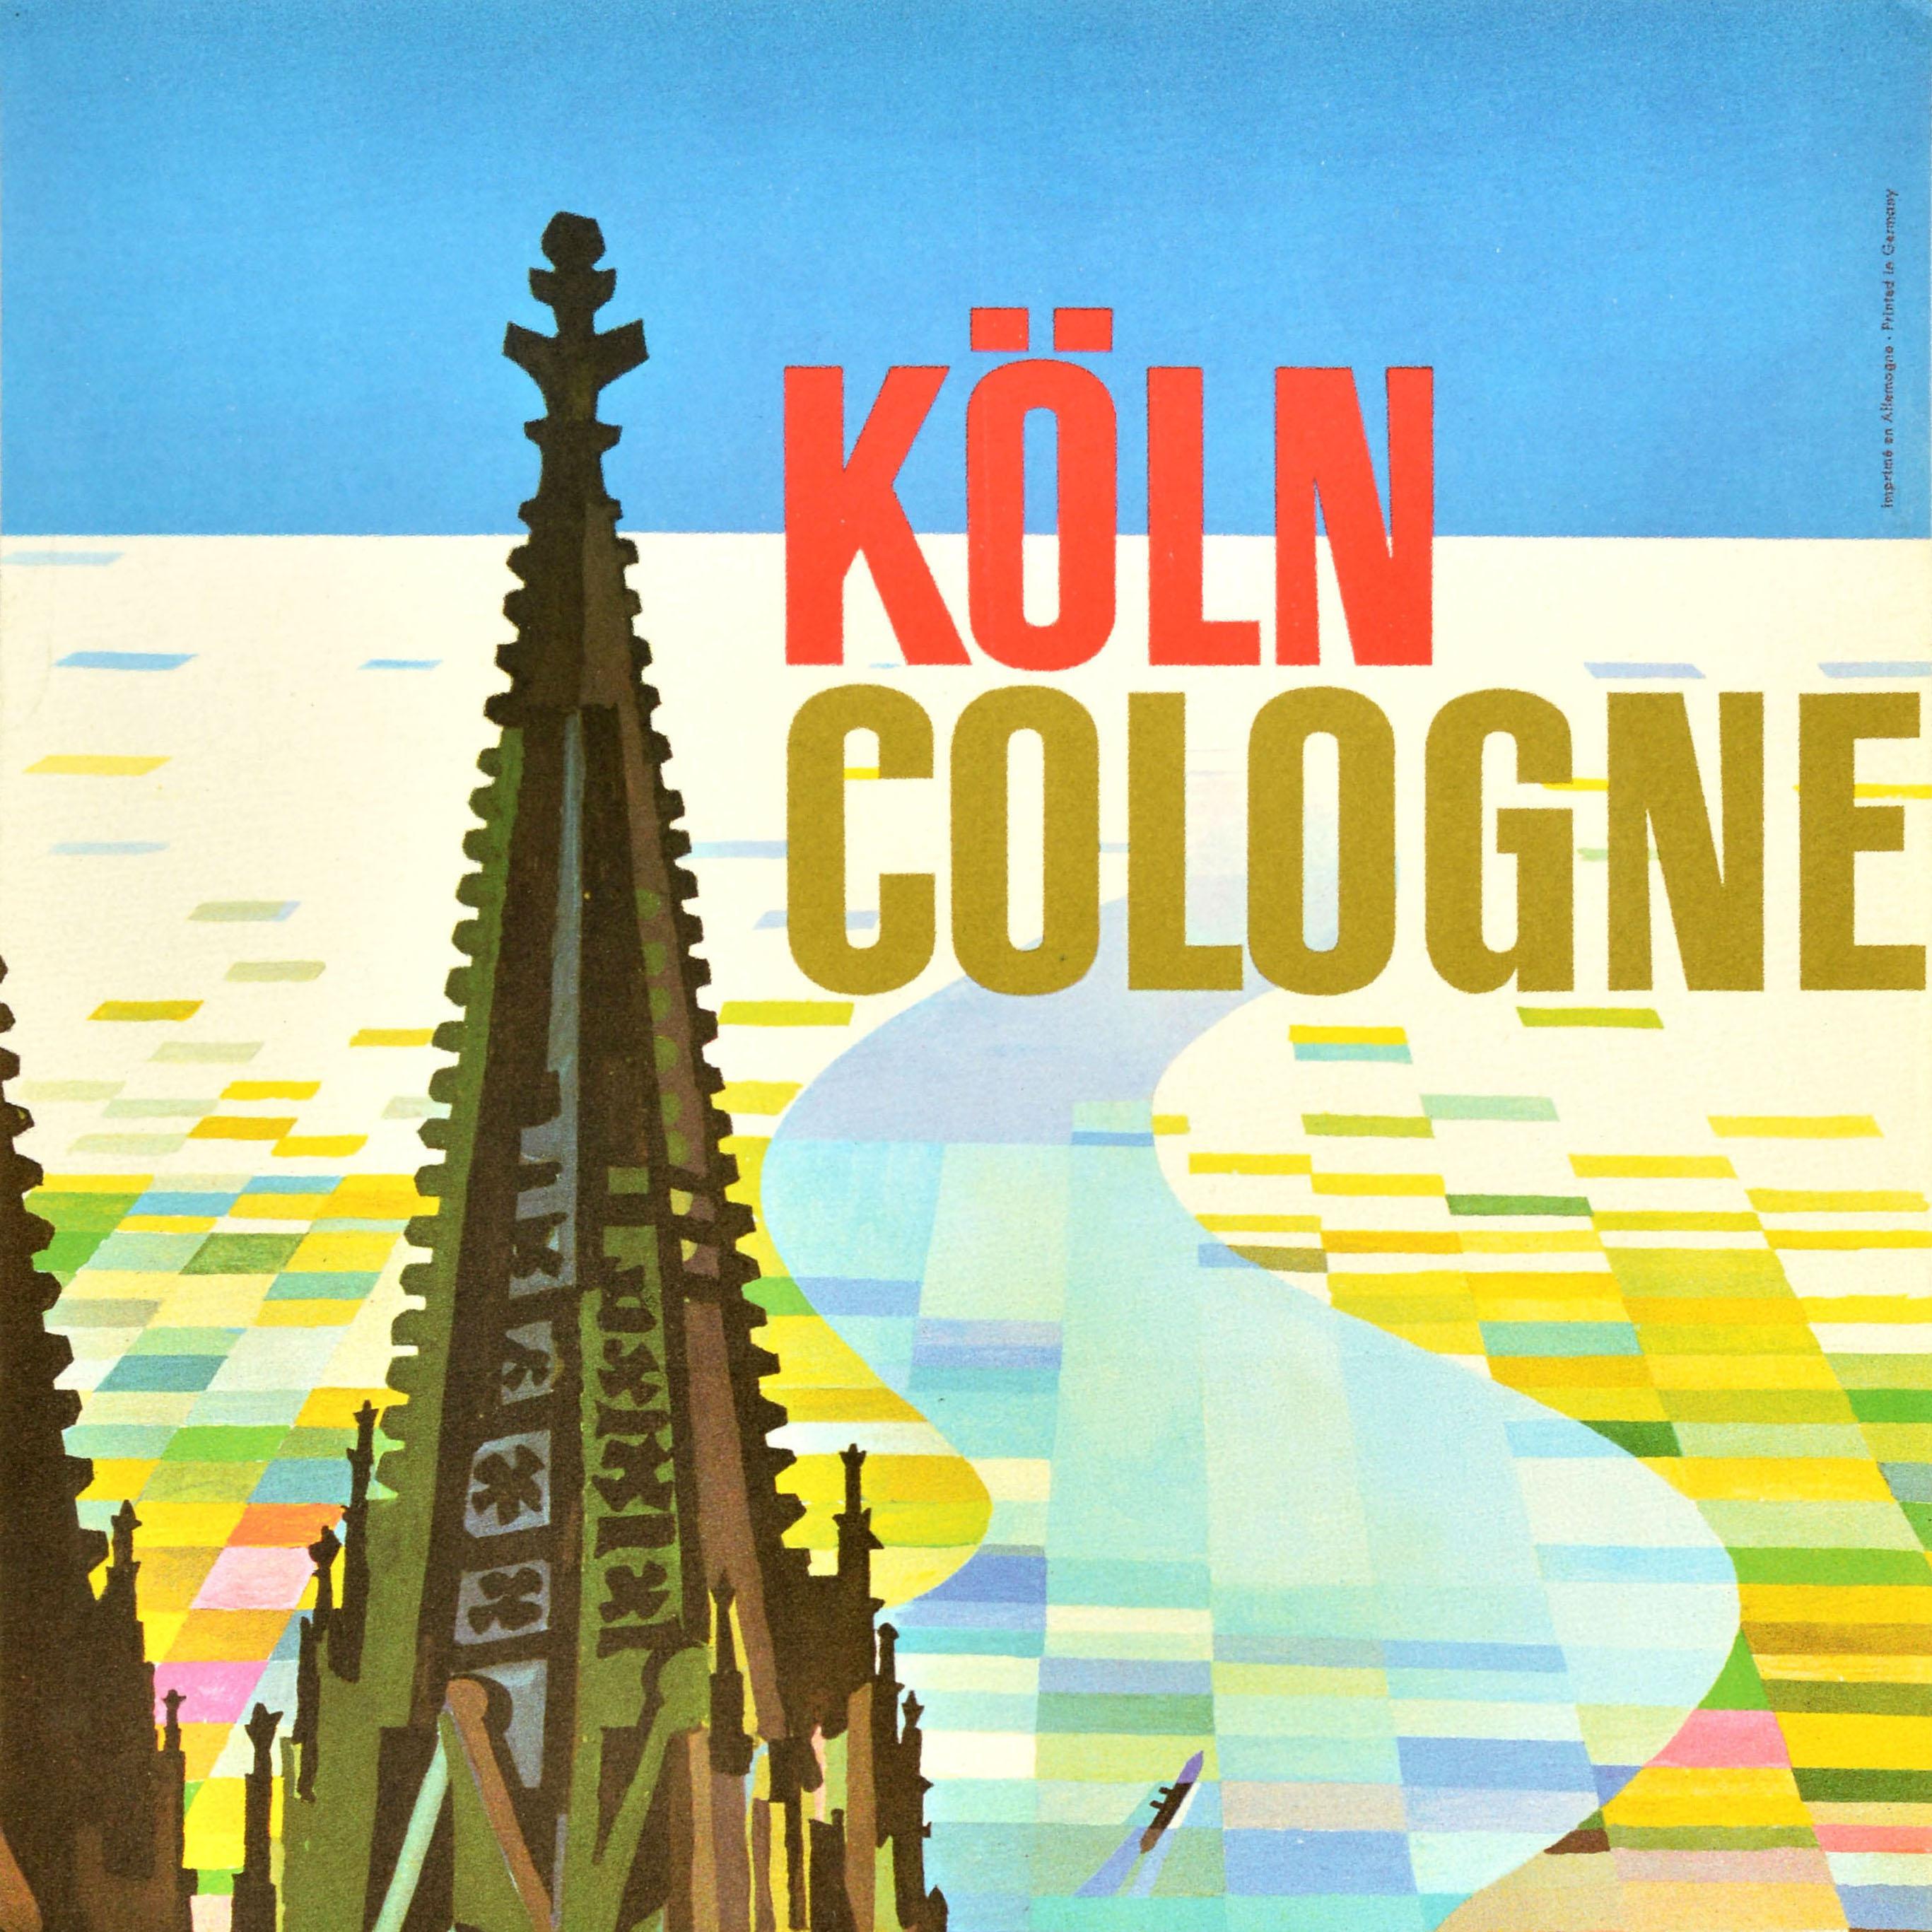 Original Vintage Travel Poster Koln Cologne Cathedral Church Of Saint Peter Art - Print by Werner Labbe